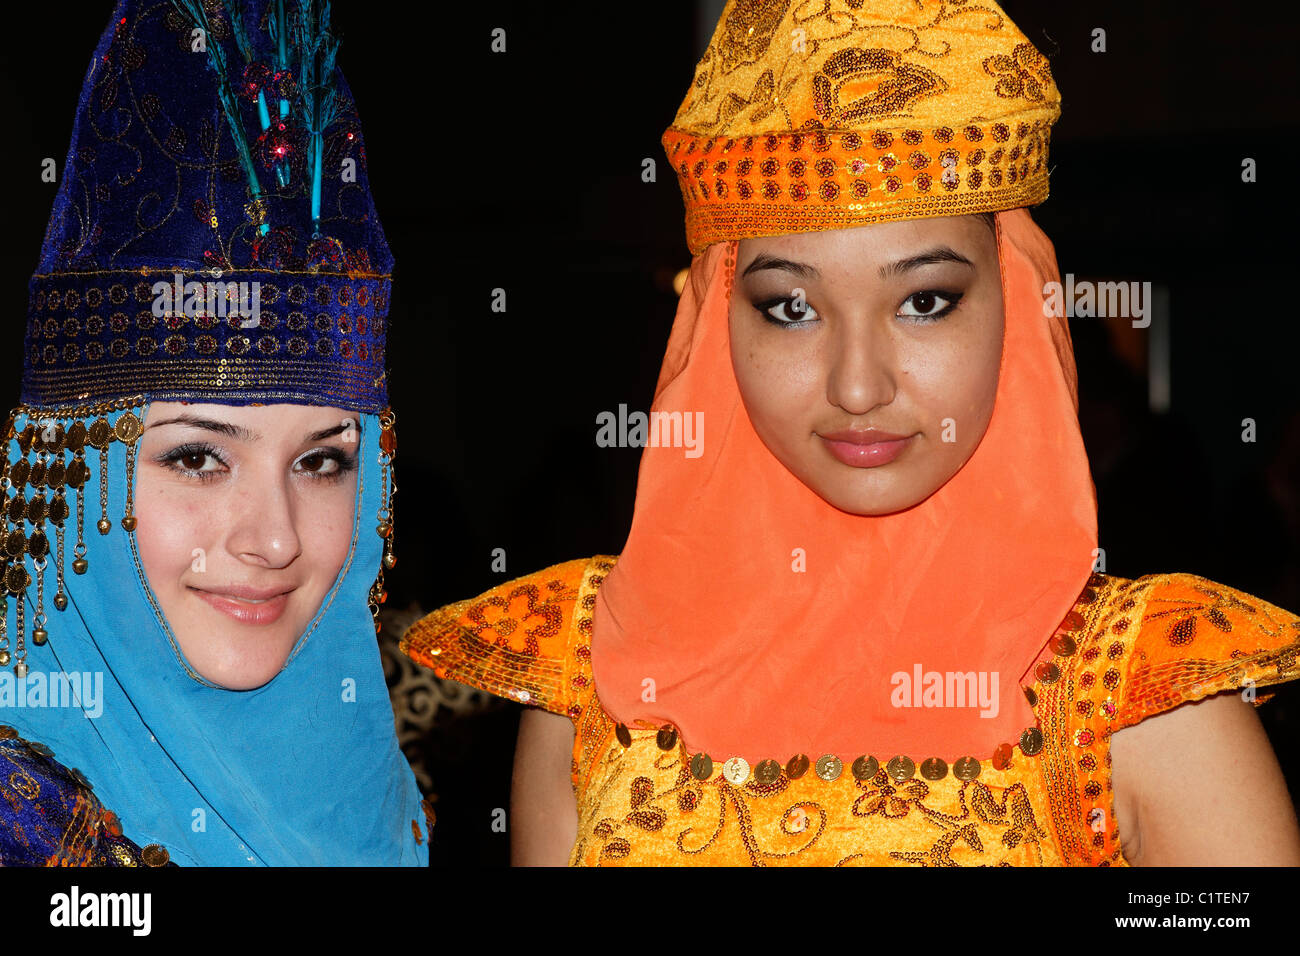 Portrait of 2 young women wearing traditional costumes of Kazakhstan. No third party rights available. ( NO MR ) | Stock Photo